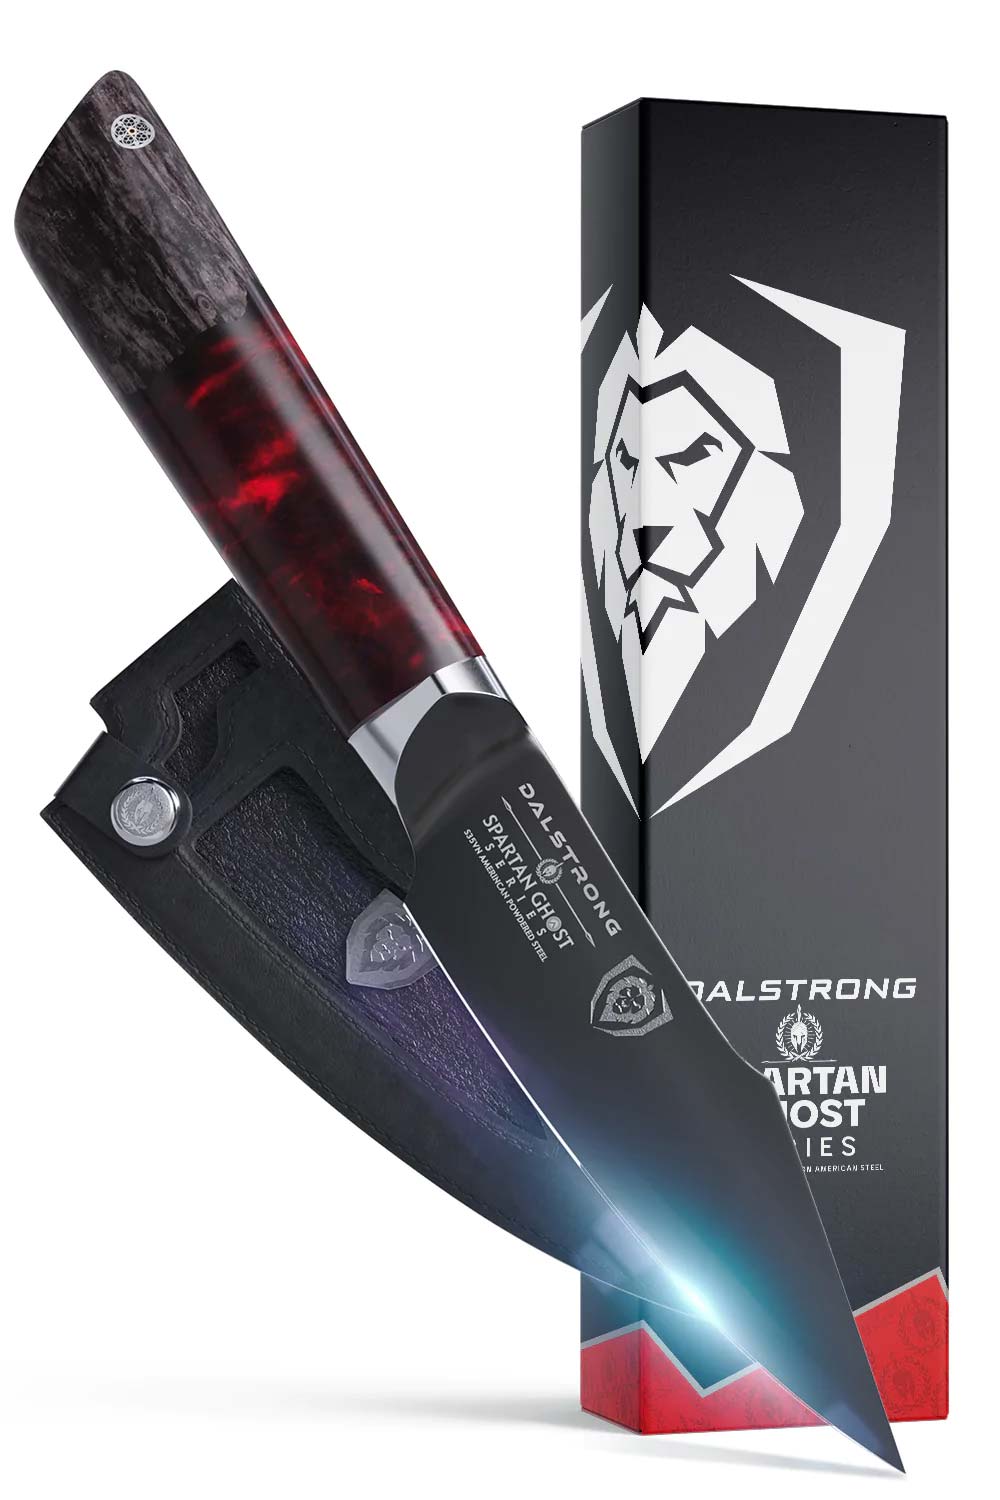 Dalstrong spartan ghost series 4 inch paring knife in front of it's premium packaging.